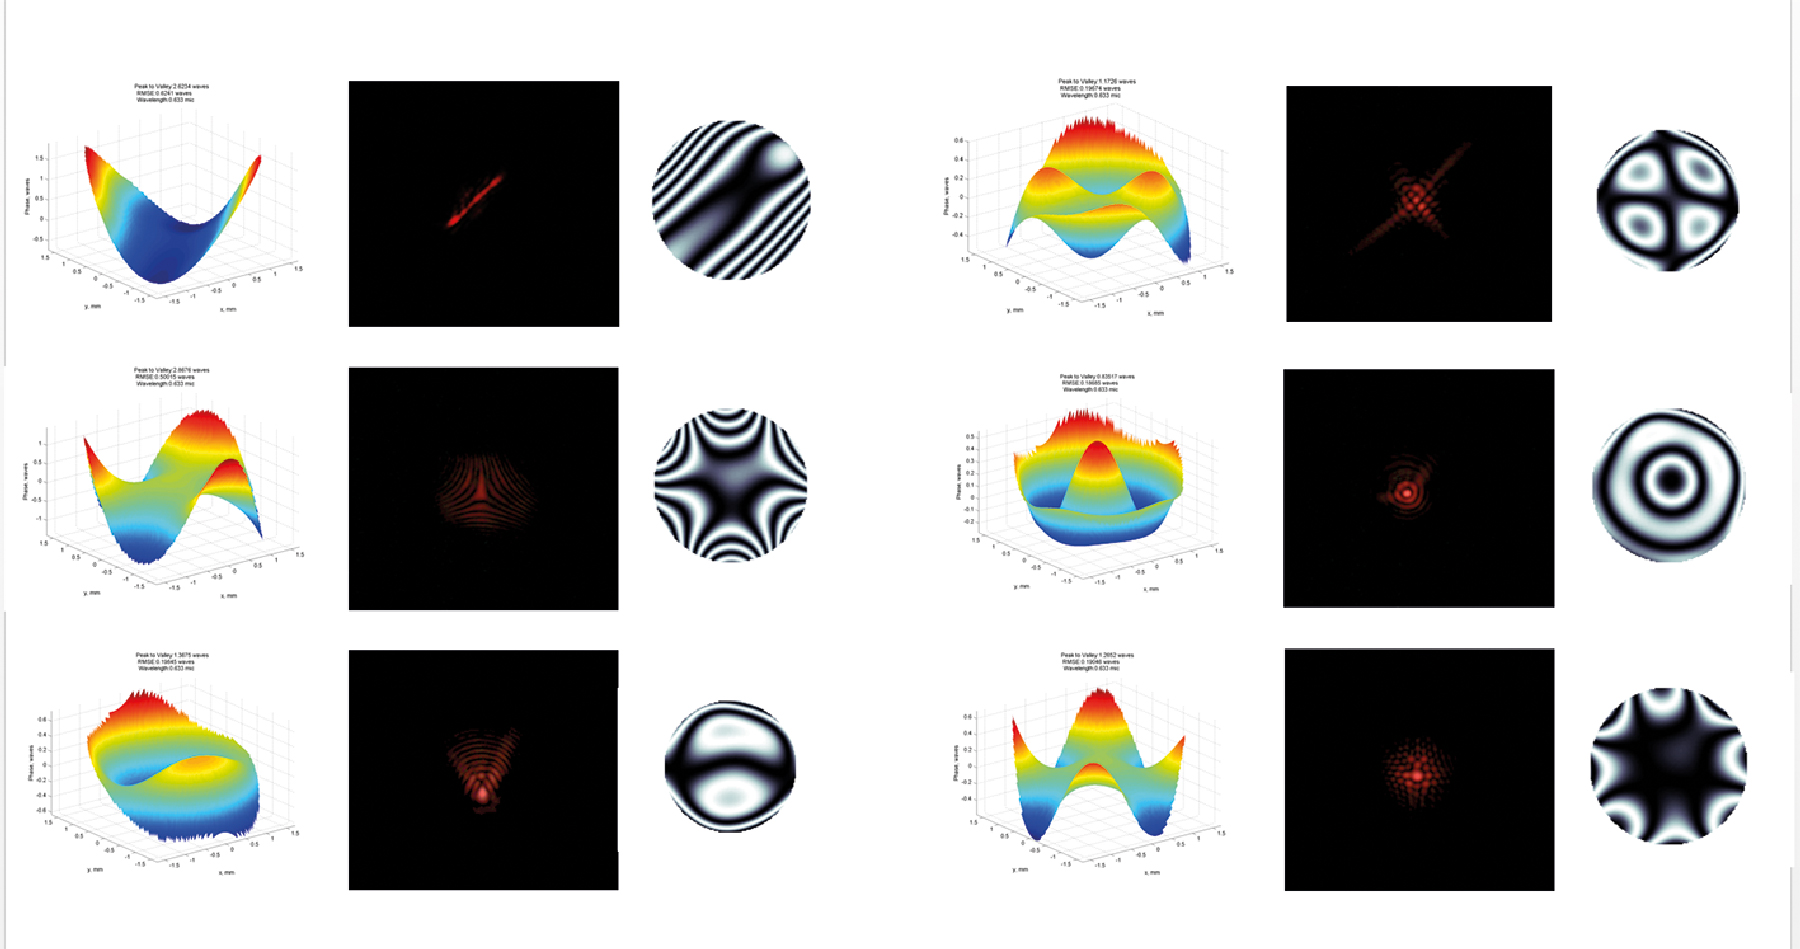 Figure 1 | Example of wavefront deformations generated with the M-AL (each panel shows the wavefront, far field in focus, and the interferogram for each aberration). Top row: astigmatism, coma and spherical aberration. Bottom row: trefoil, secondary astigmatism, and quadrifoil. (Figure: Opto Engineering srl)